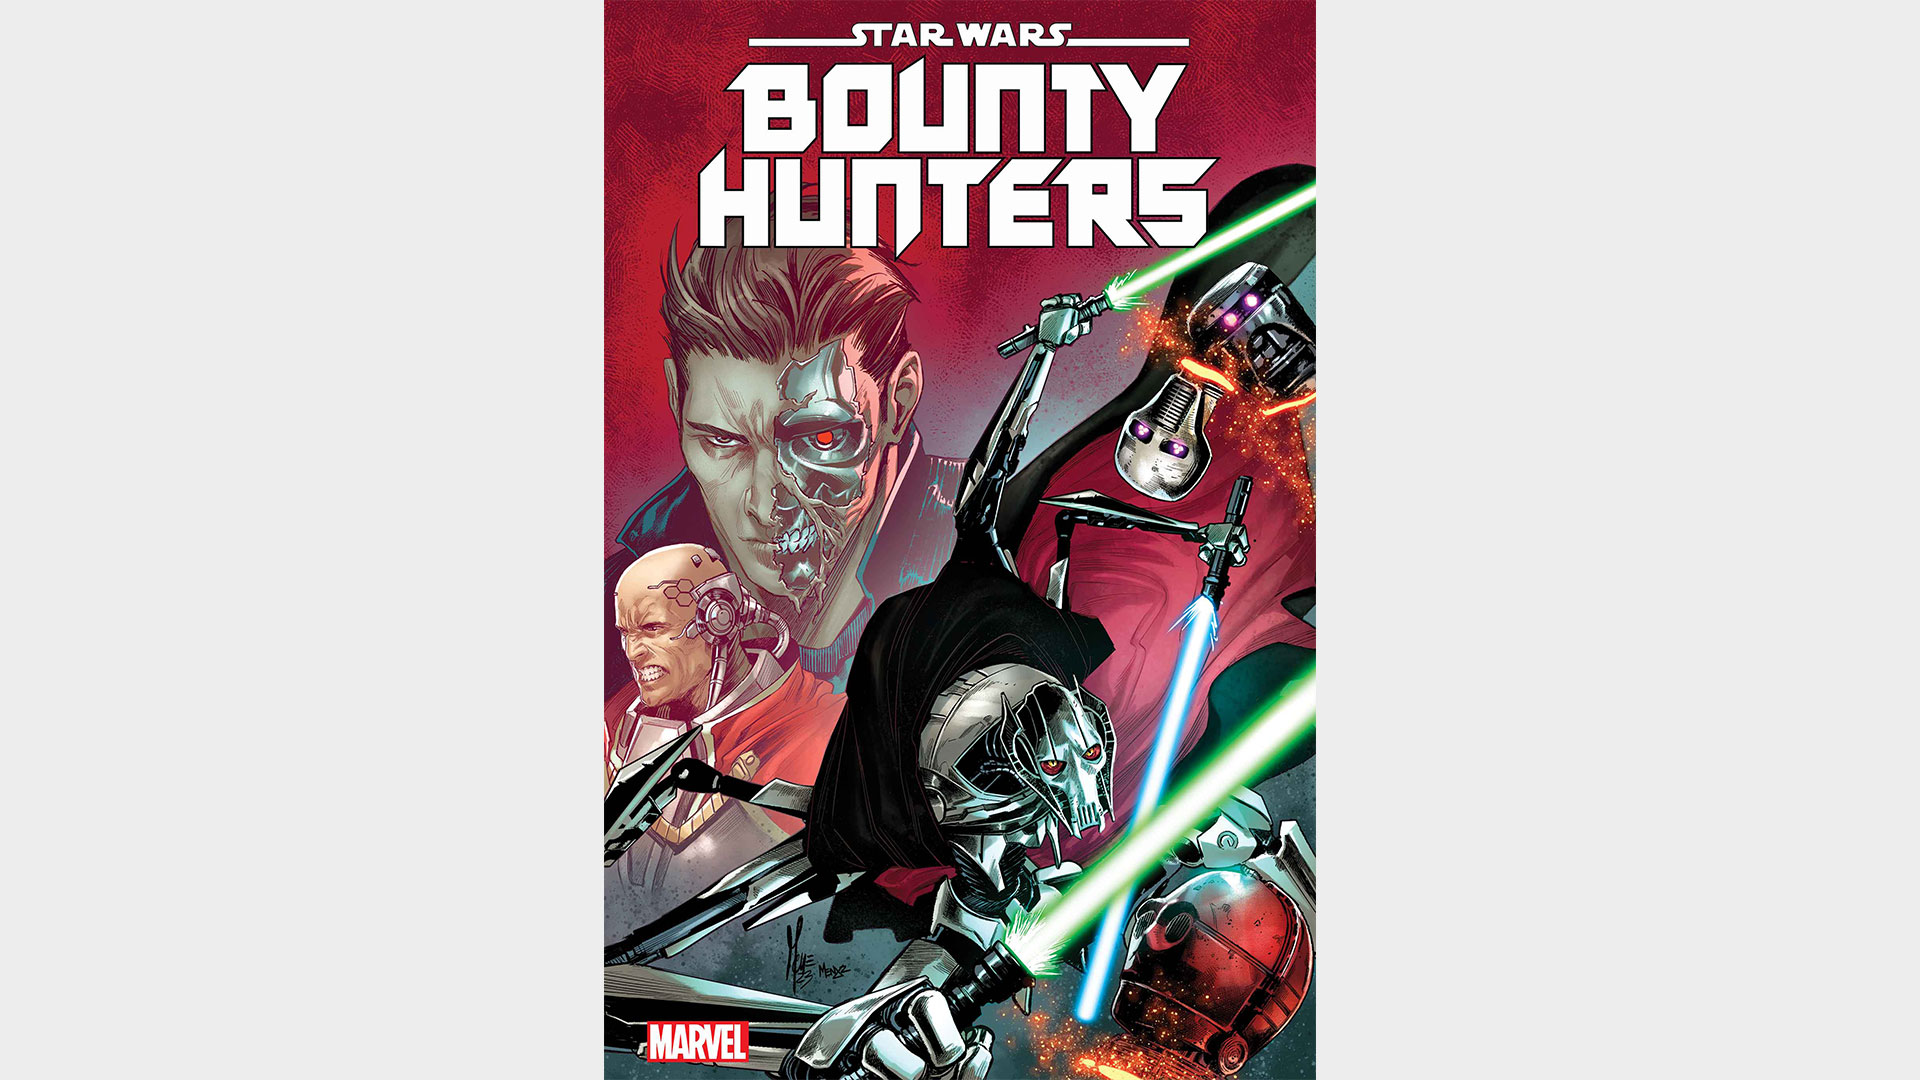 Star Wars Bounty Hunters #38 couverture